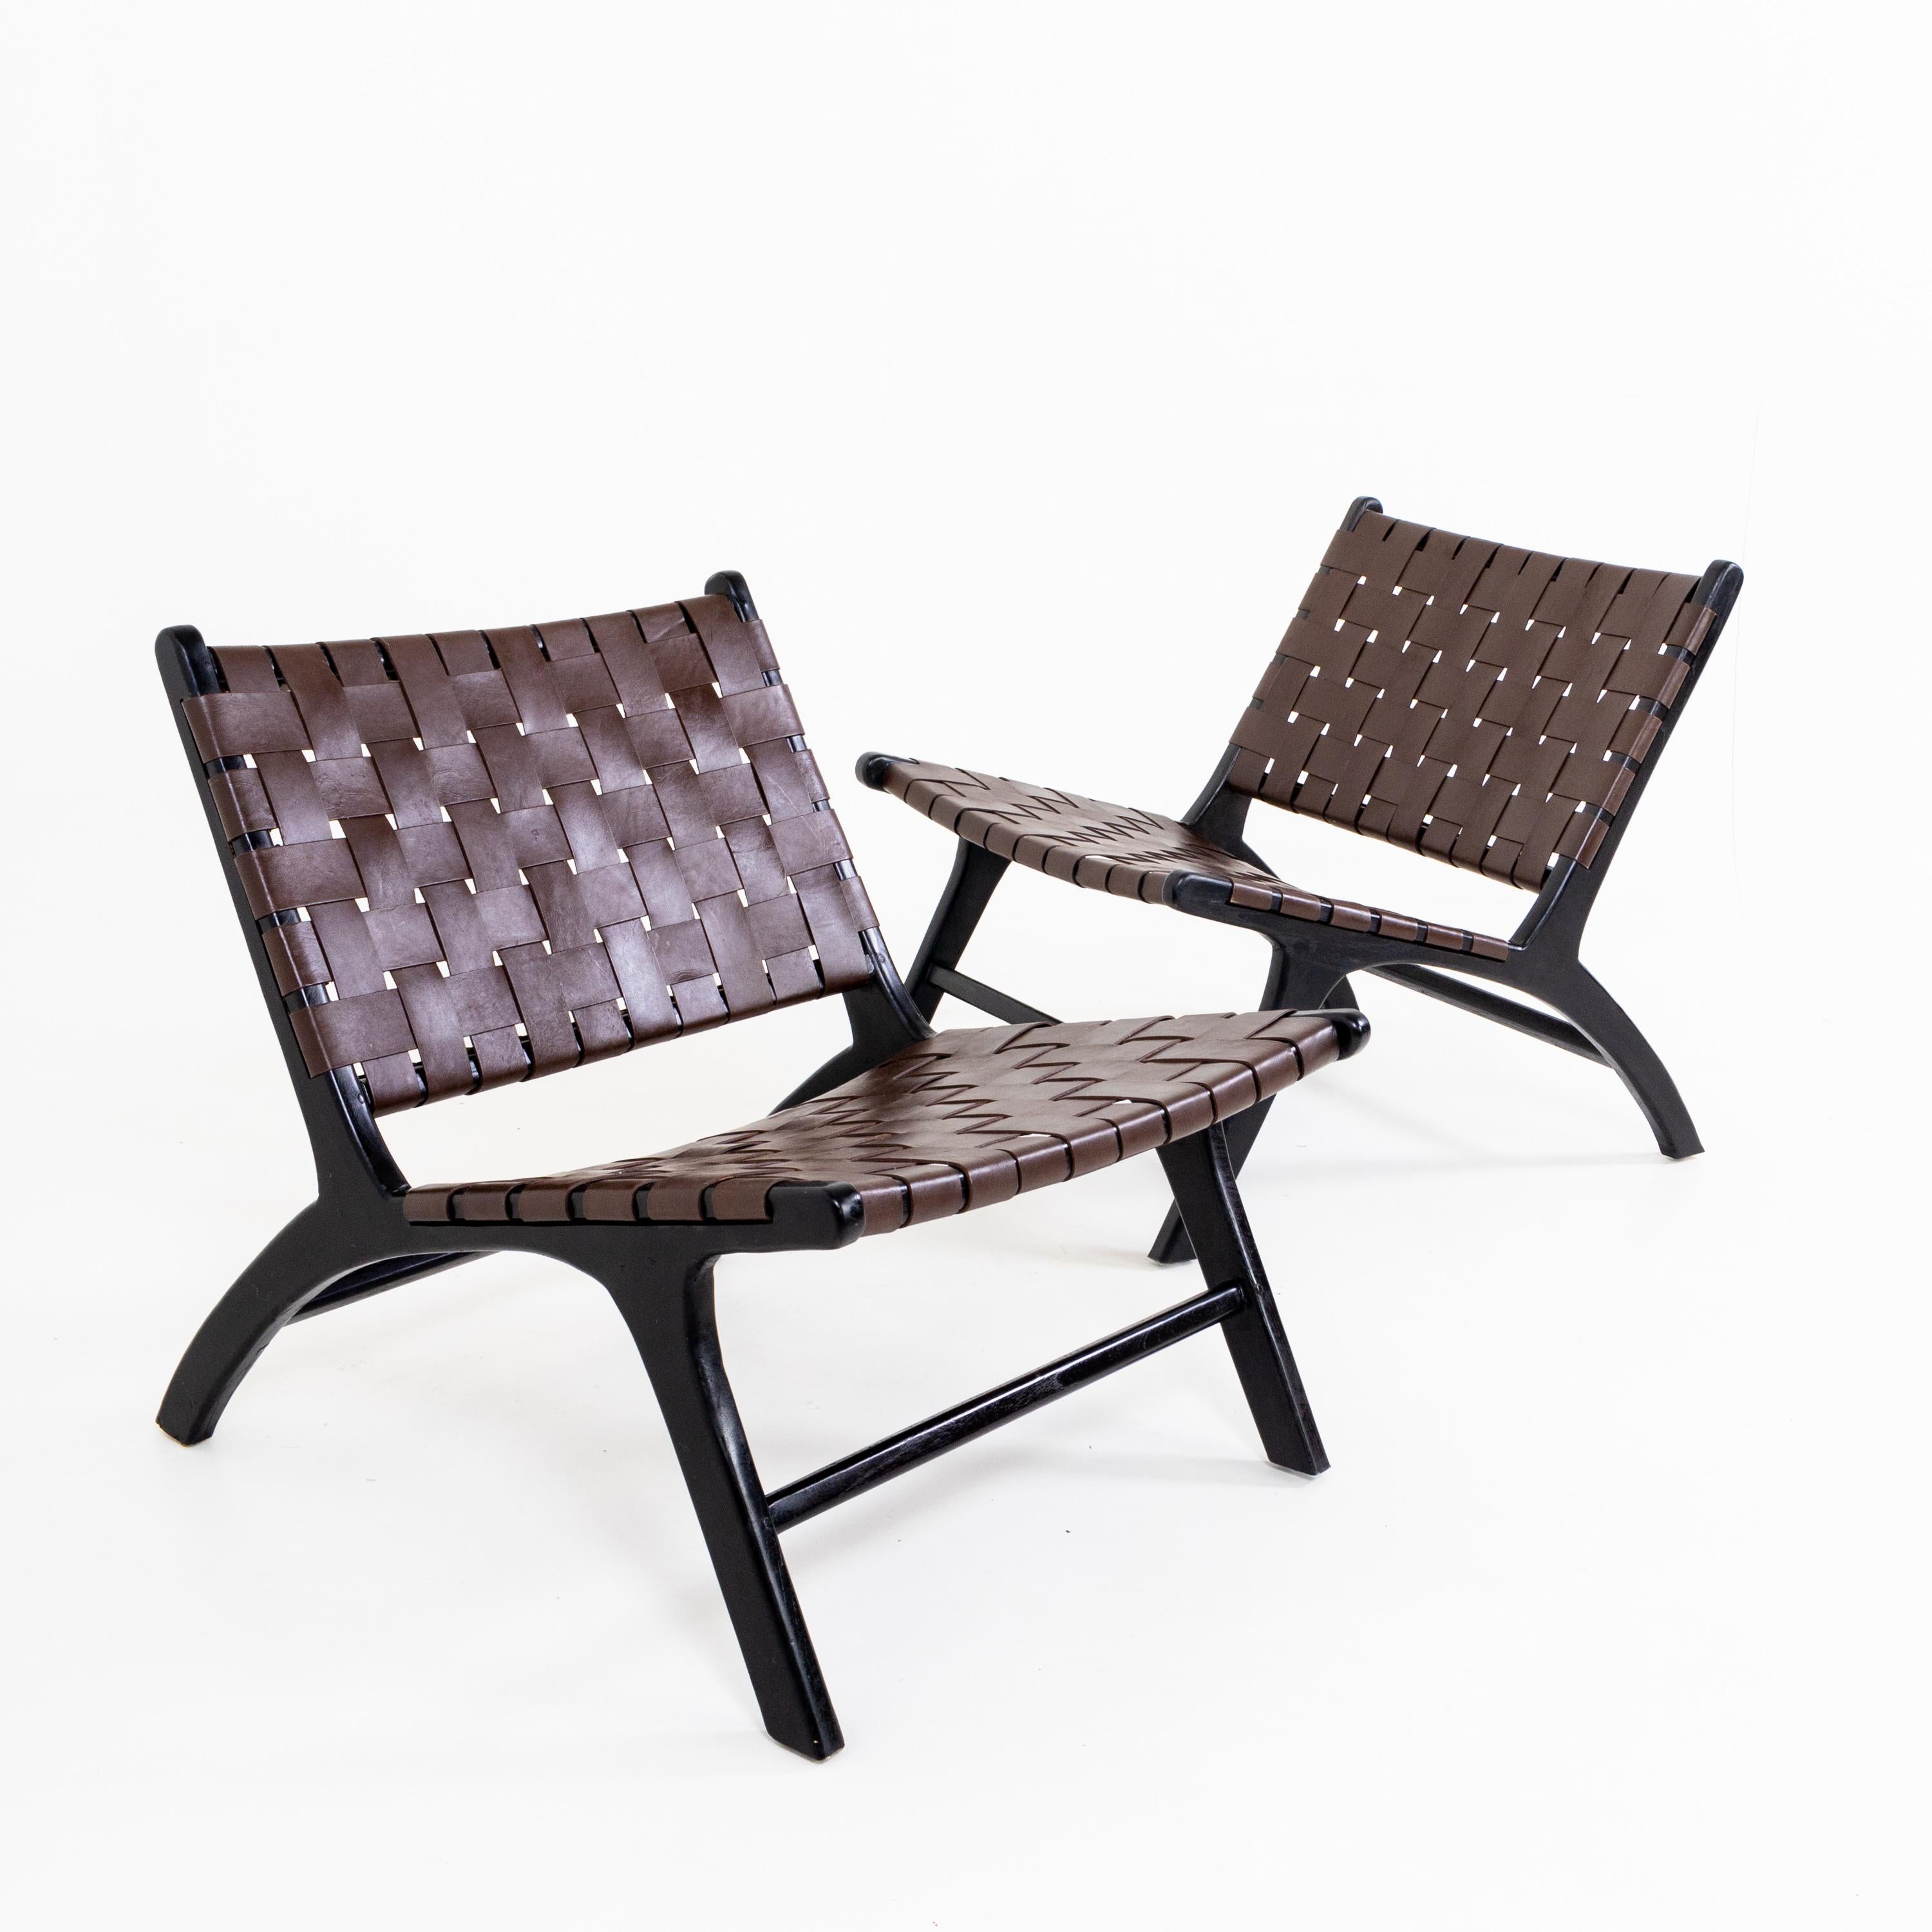 Post-Modern Olivier de Schrijver, Lounge Chairs with Leather Cover, 20th Century